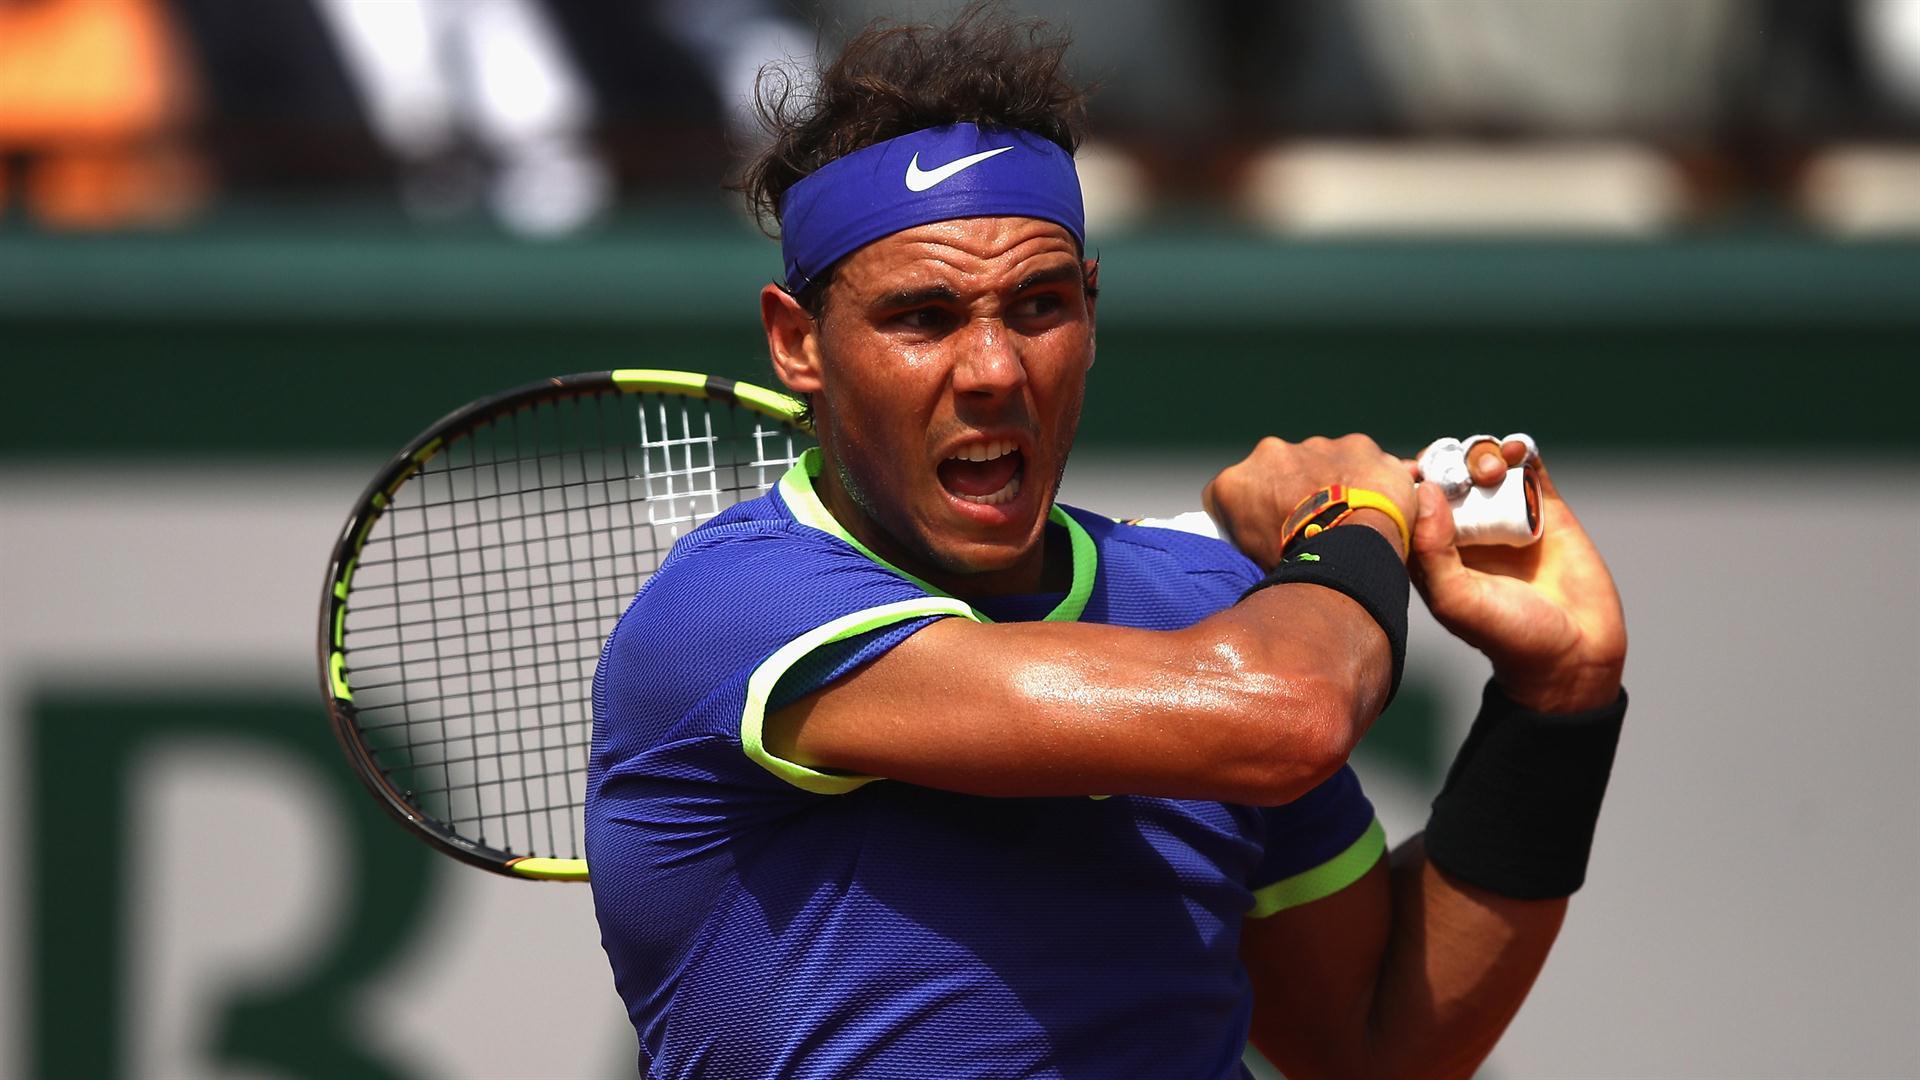 French Open: Rafael Nadal looks back at ten titles at Roland